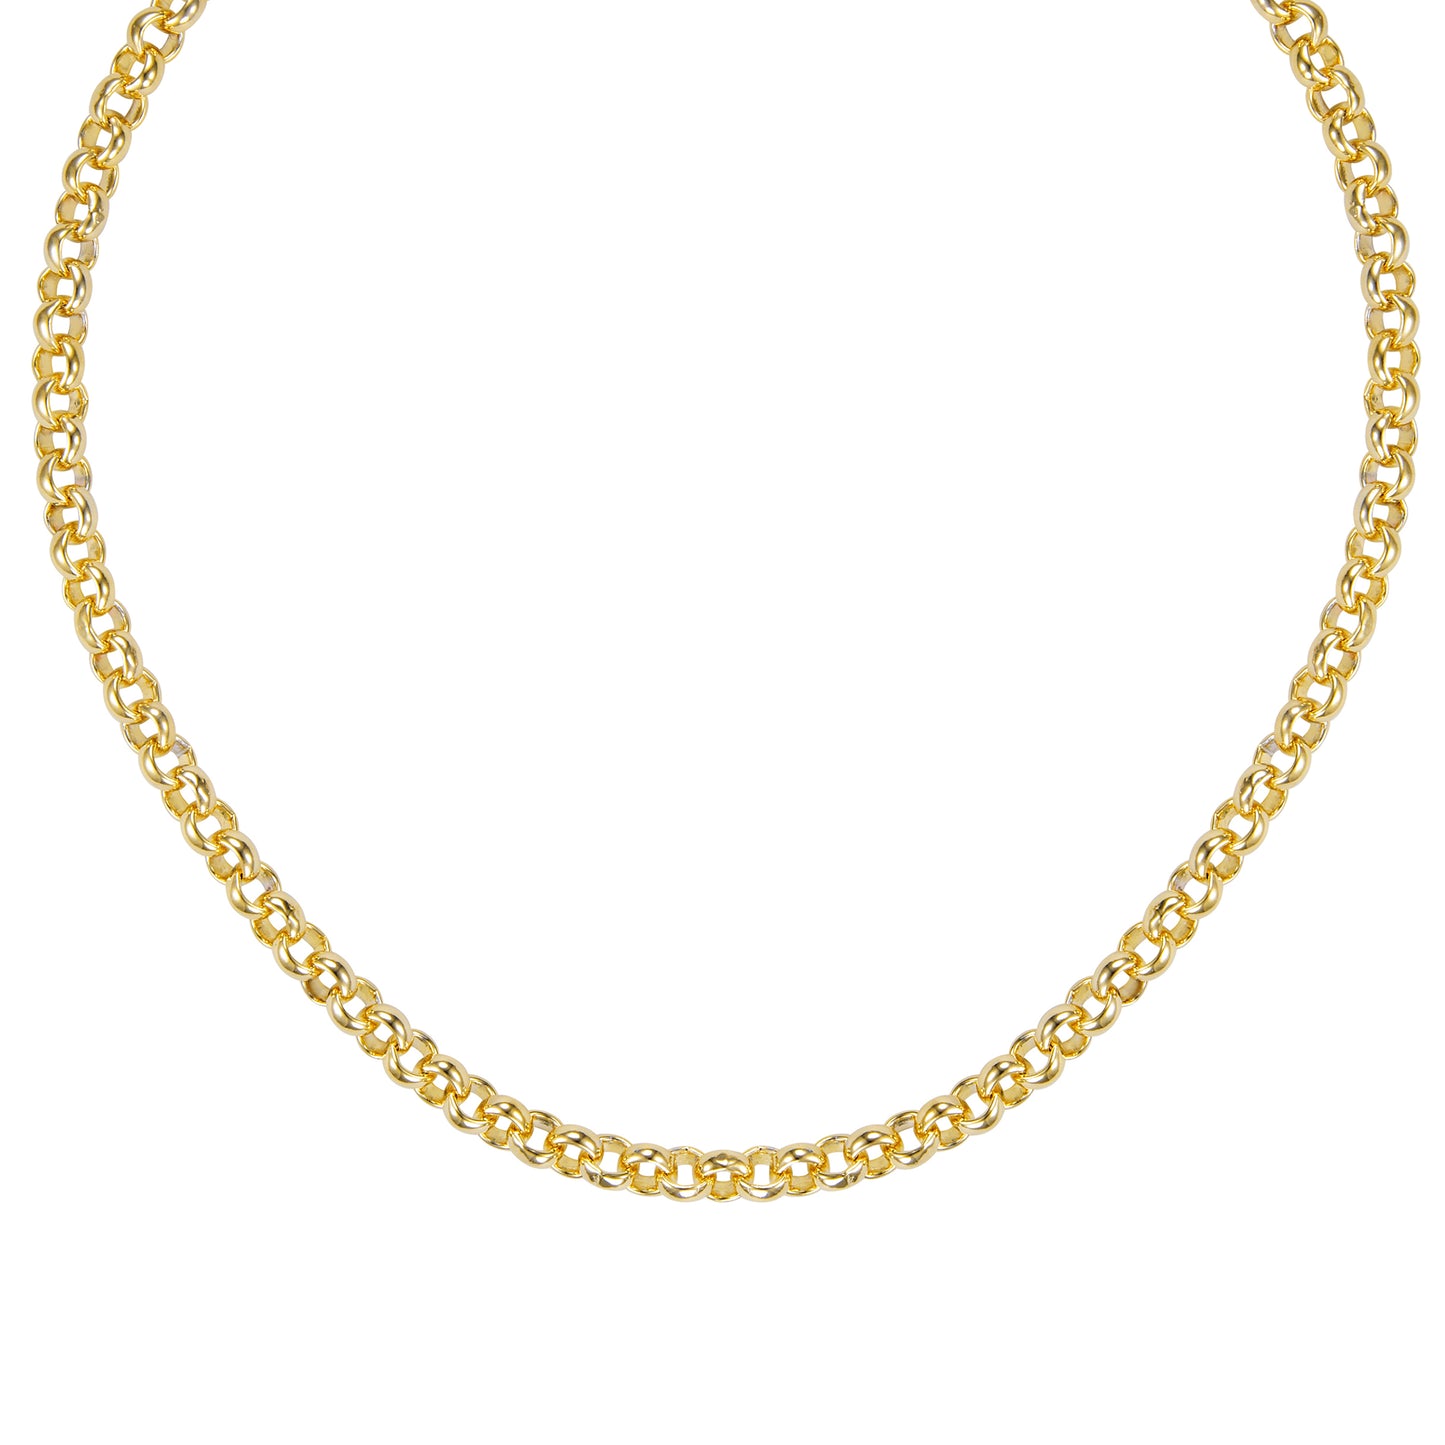 18" Rolo Link Yellow Gold Plated Necklace with Toggle Clasp and Blue Stones